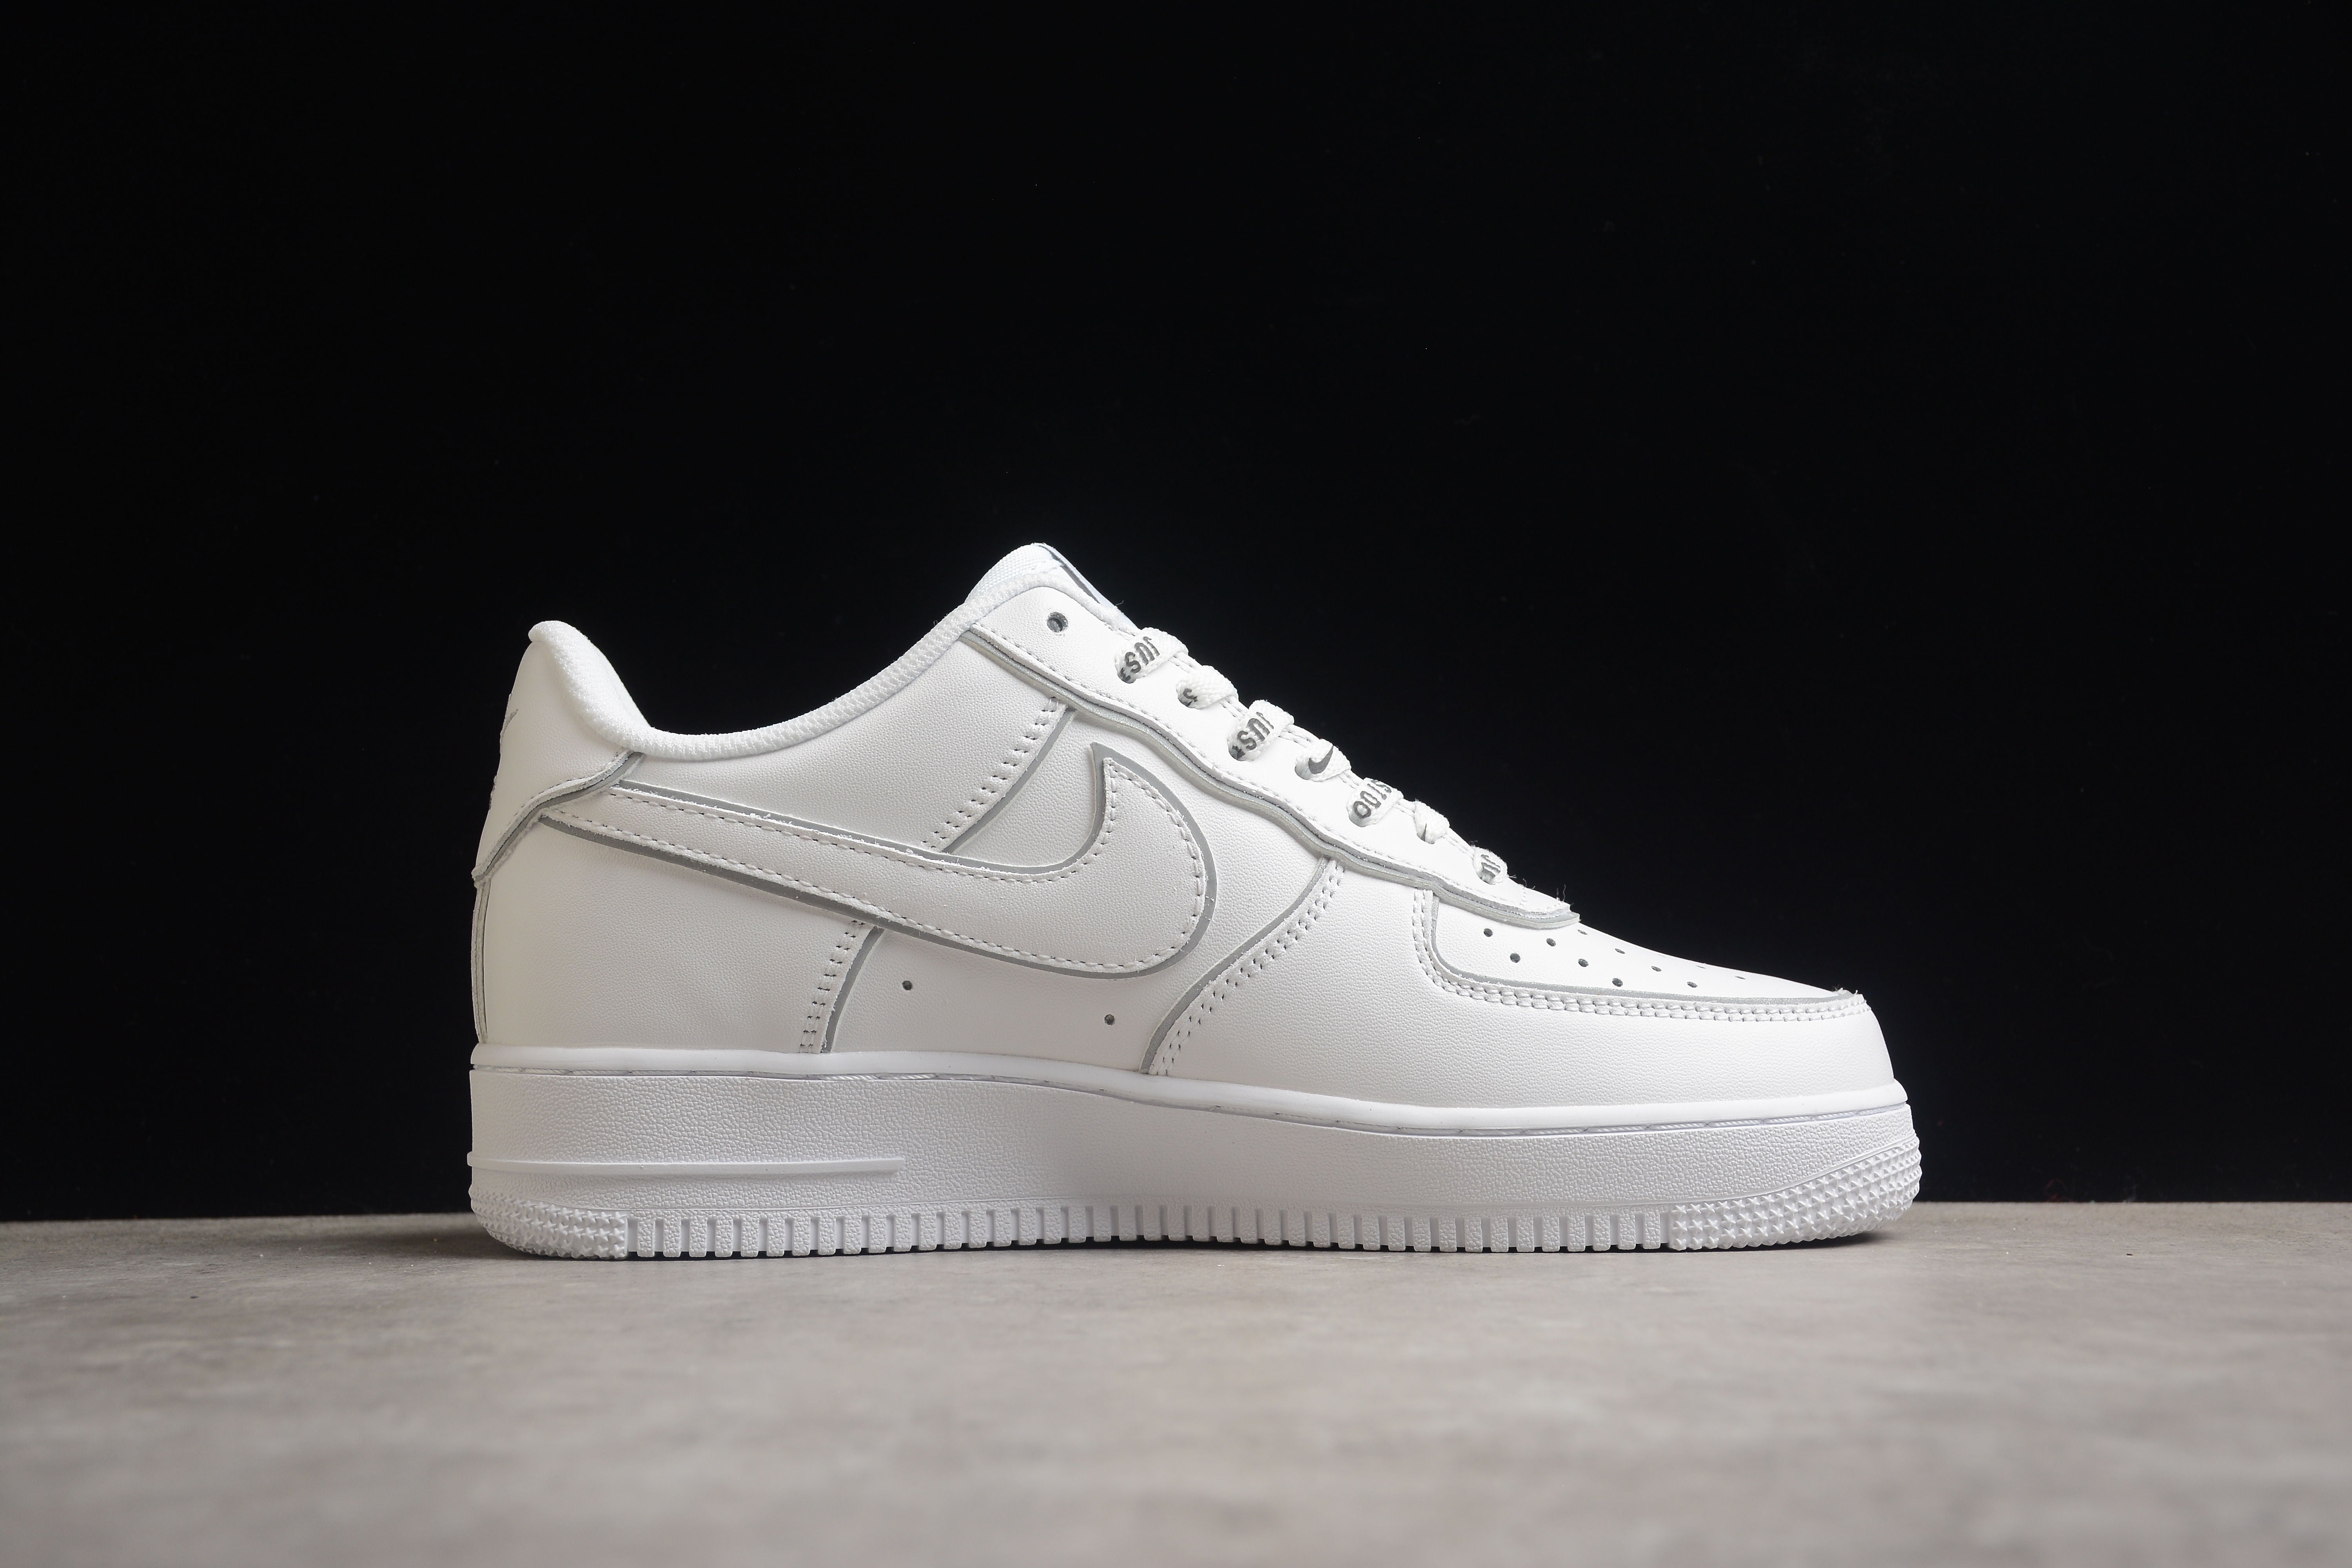 Nike airforce A1 classic white shoes